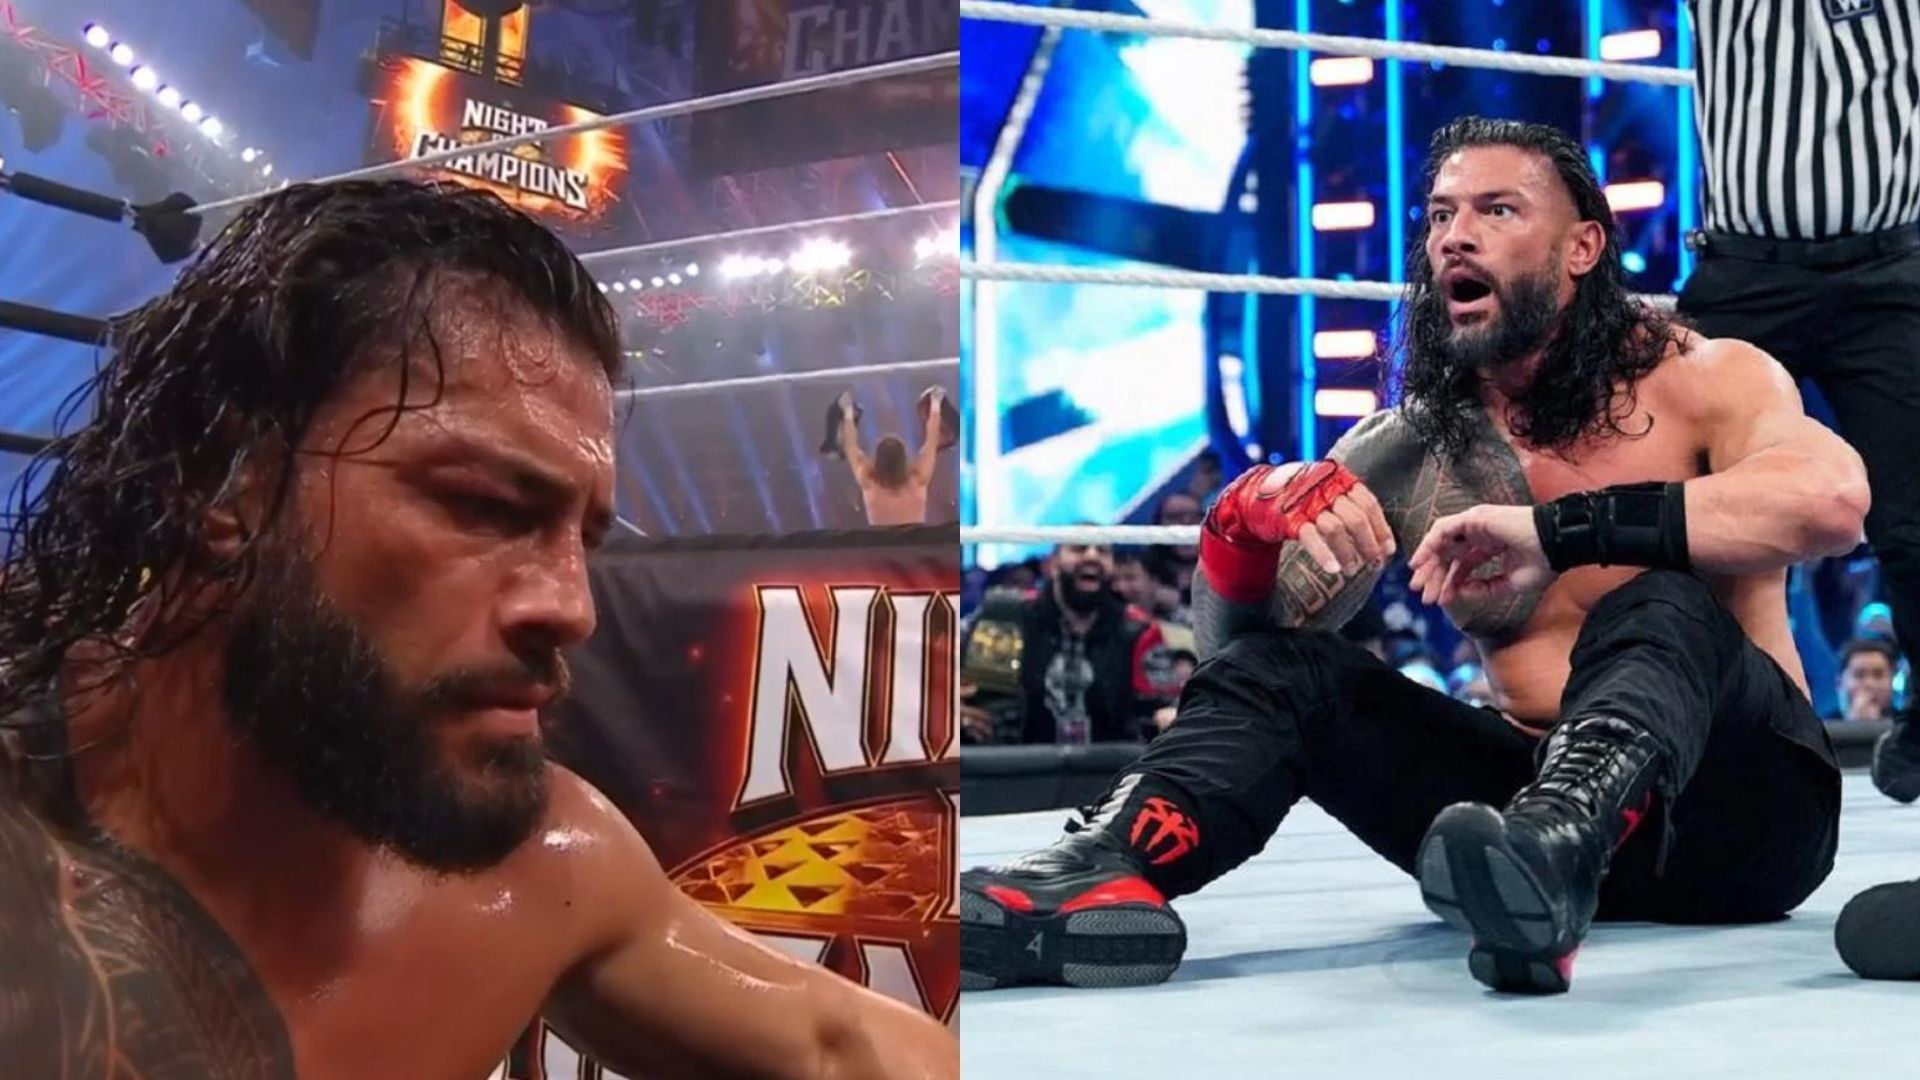 Roman Reigns was seemingly seen breaking character at Night of Champions